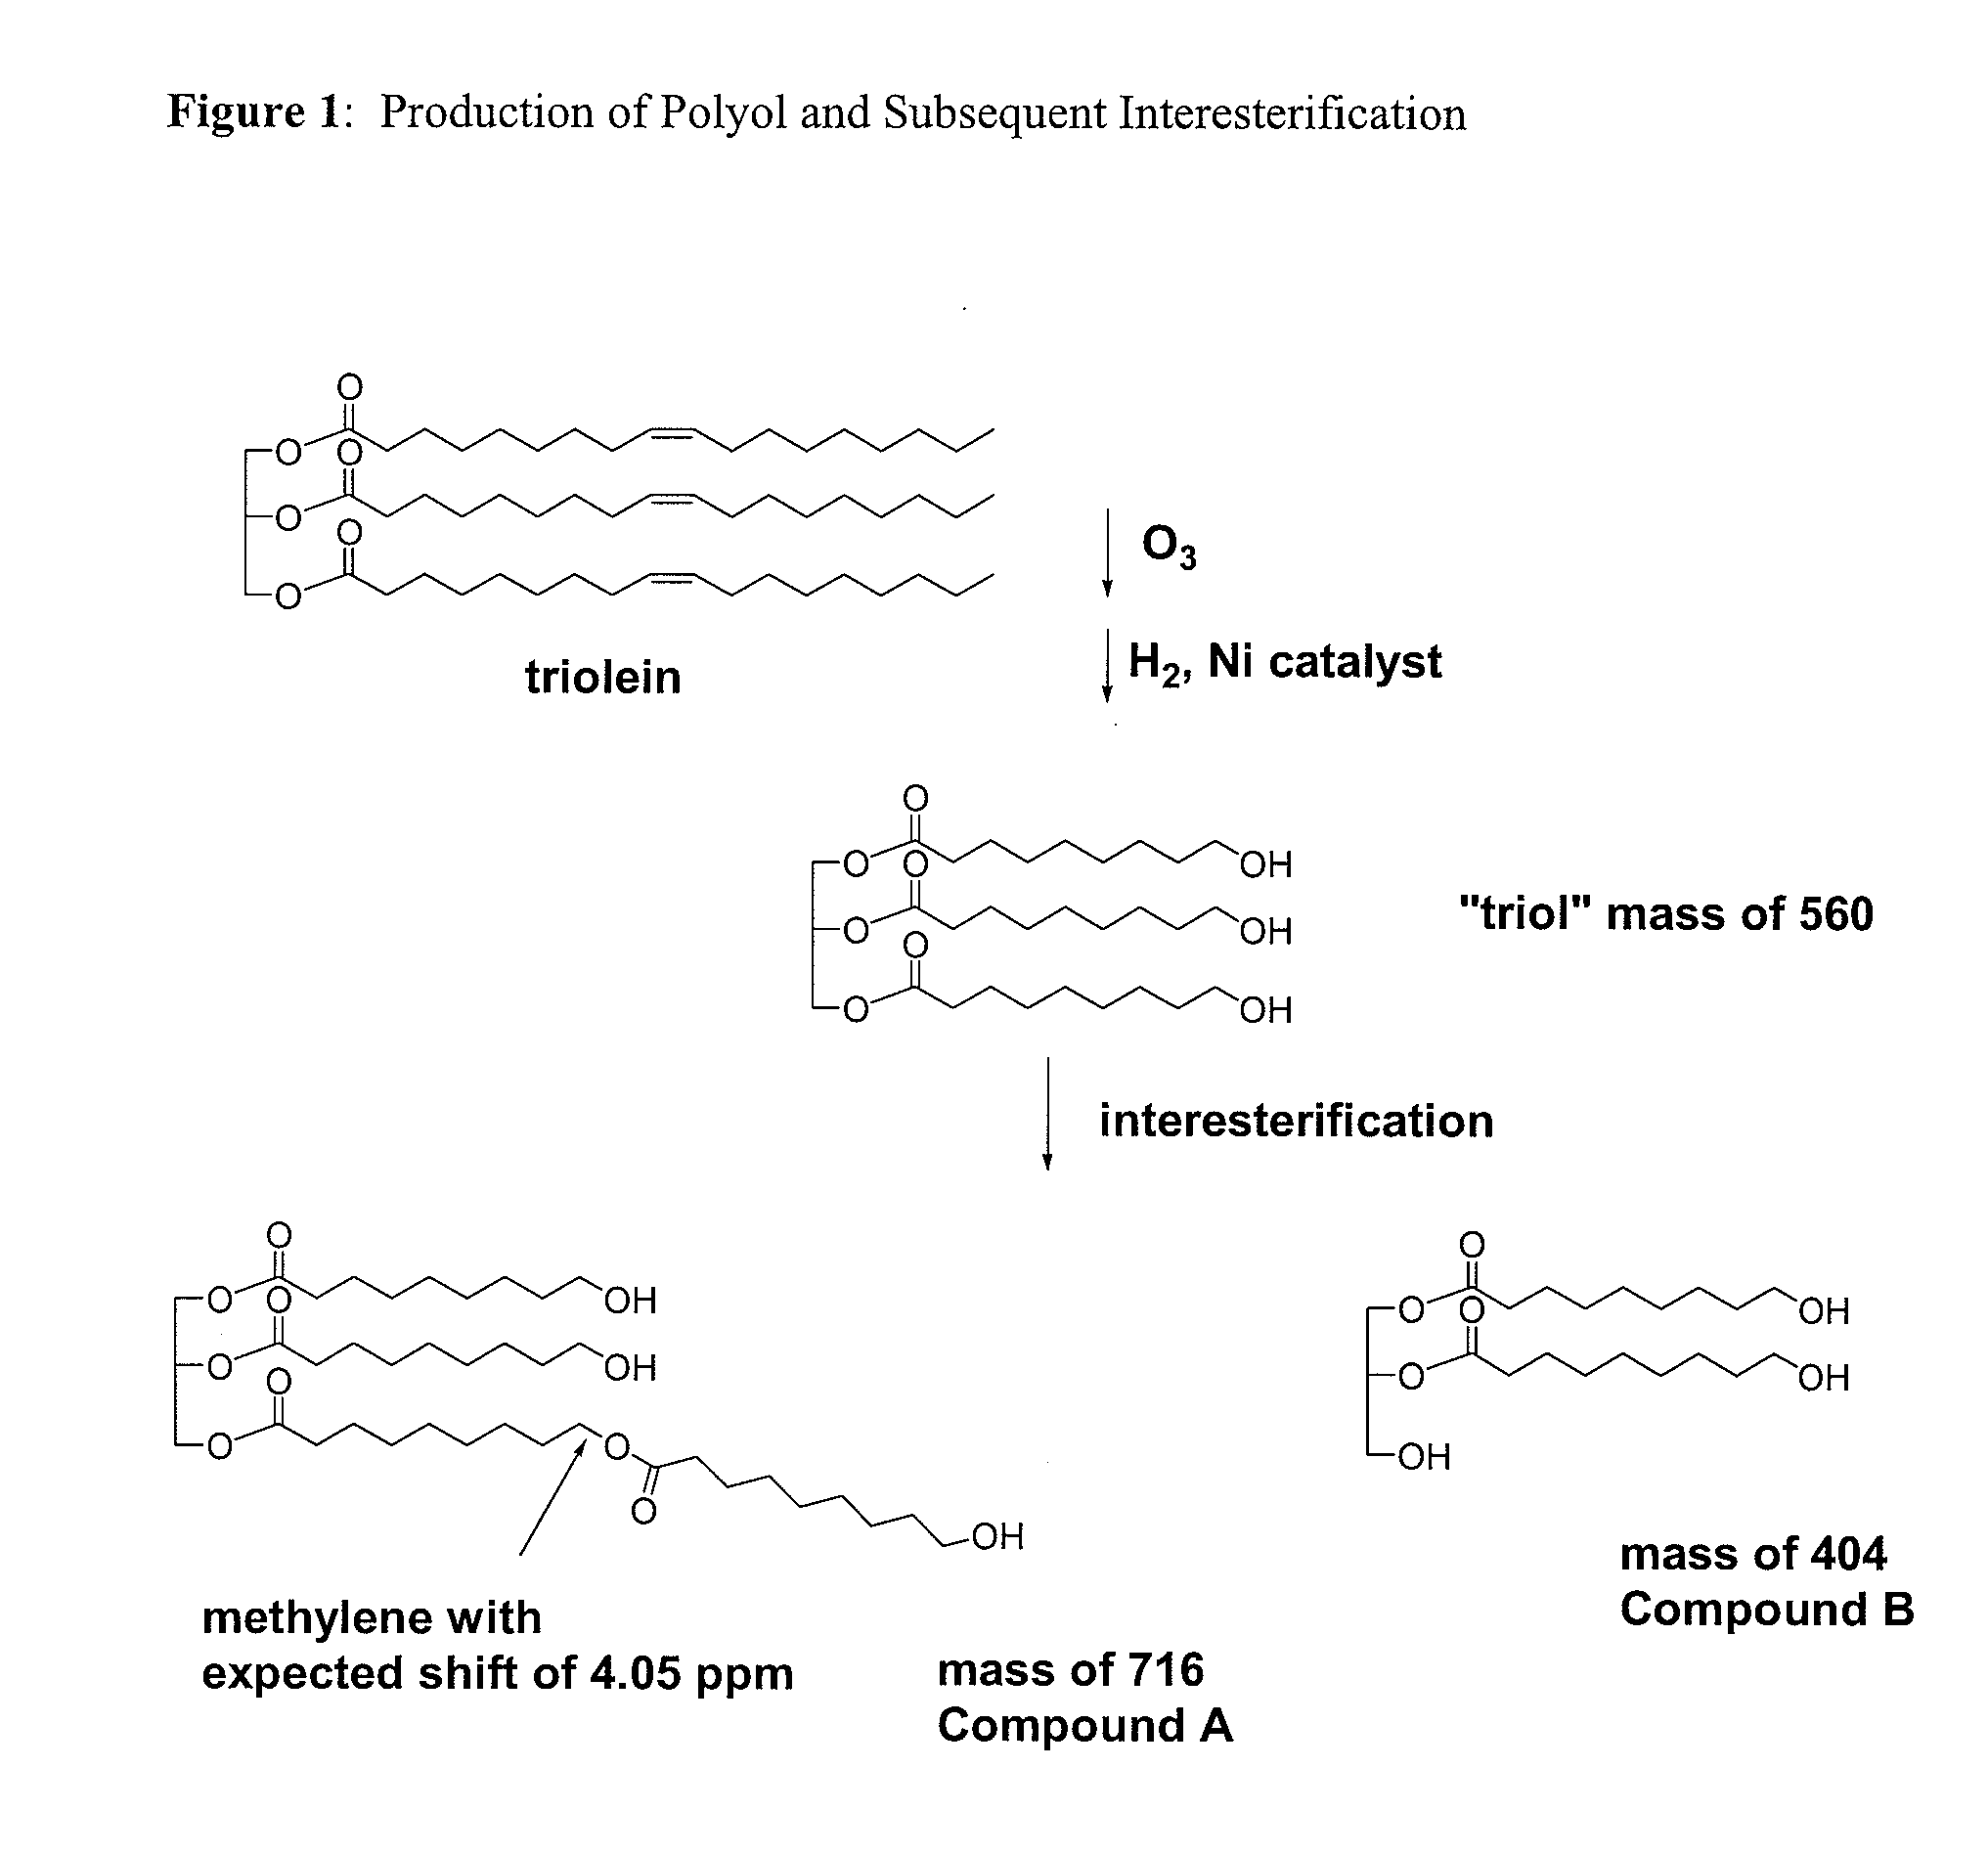 Bioplastics, monomers thereof, and processes for the preparation thereof from agricultural feedstocks